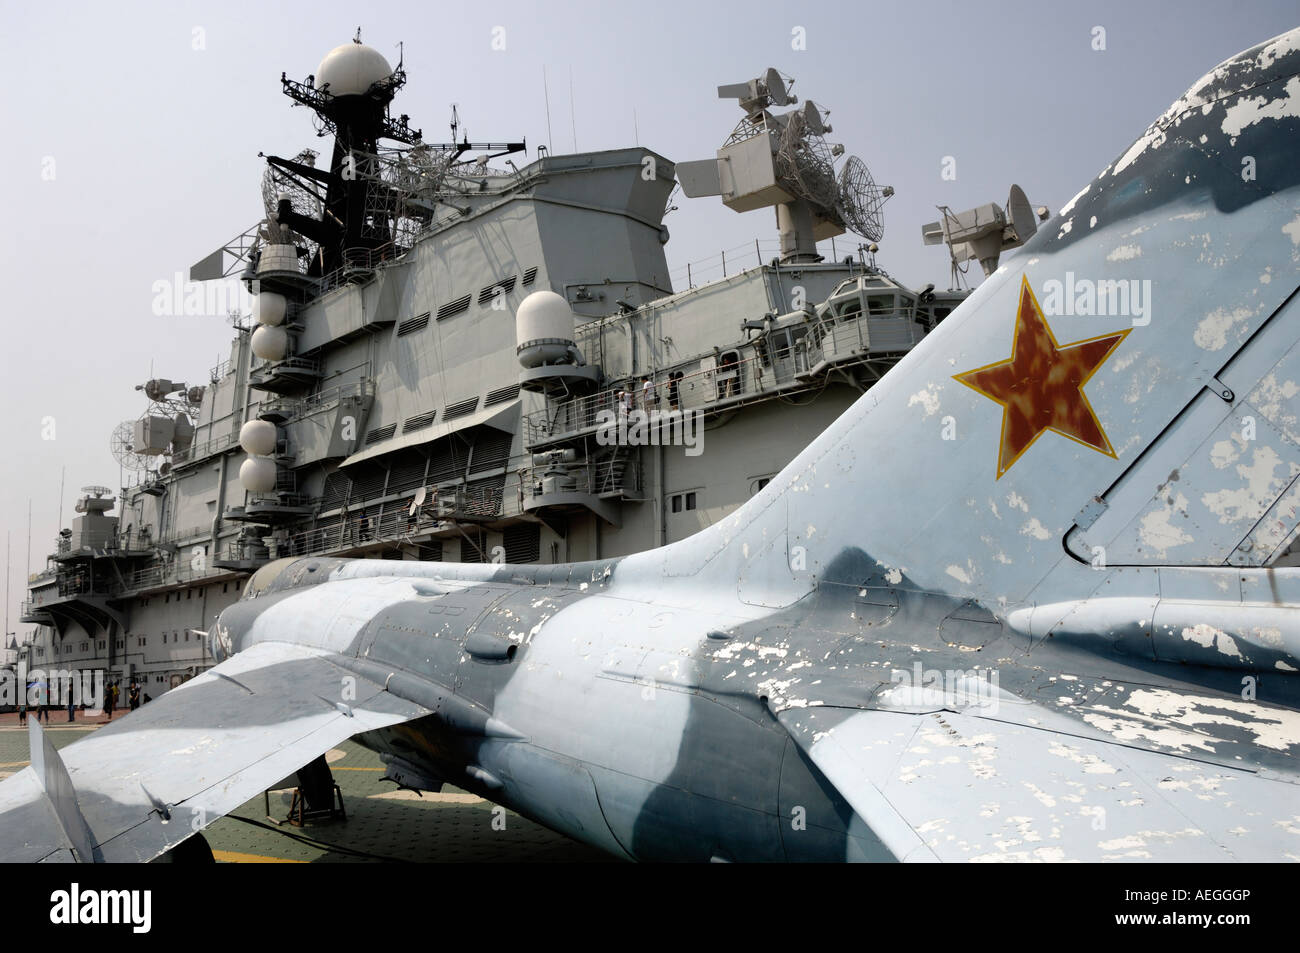 Soviet aircraft carrier Kiev and Su-27 aircraft in the military theme park in Tianjin China 19 Aug 2007 Stock Photo